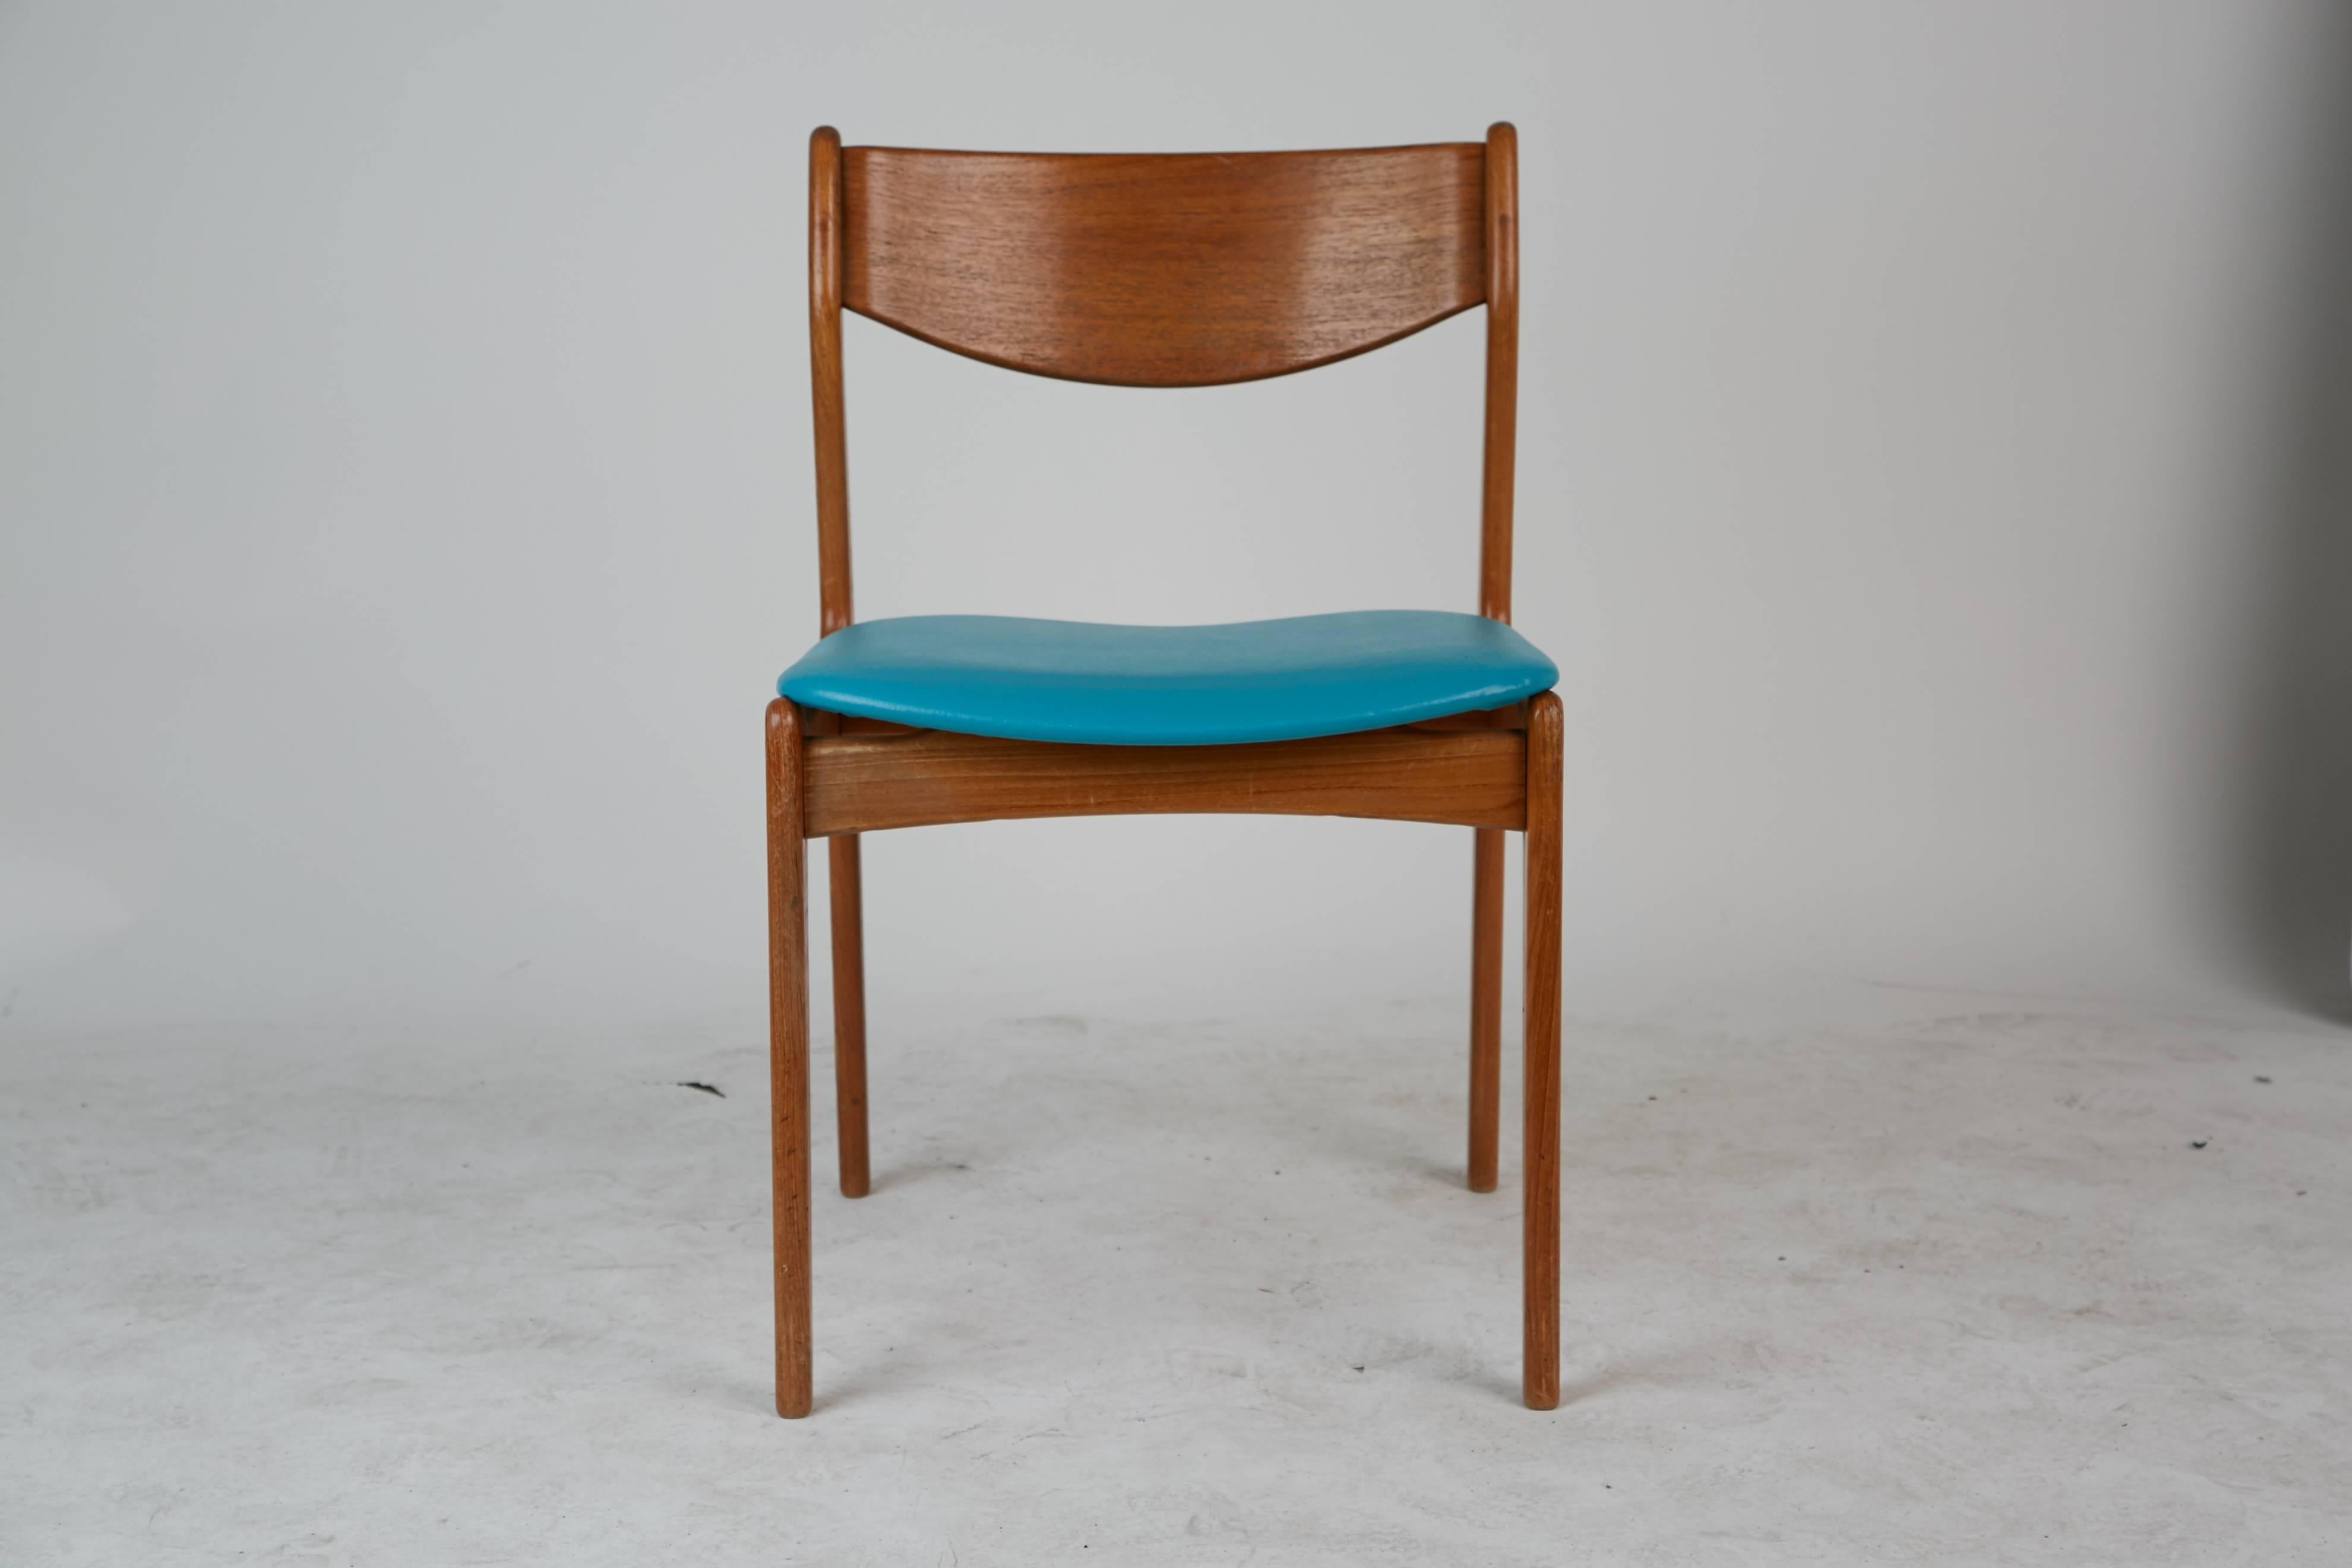 This attractive Danish Modern teak side chair with teal upholstery, circa 1960 is a great mid century modern addition to any space. This side chair is fabricated from teak featuring the use of clean lines and minimal design. The seat has been